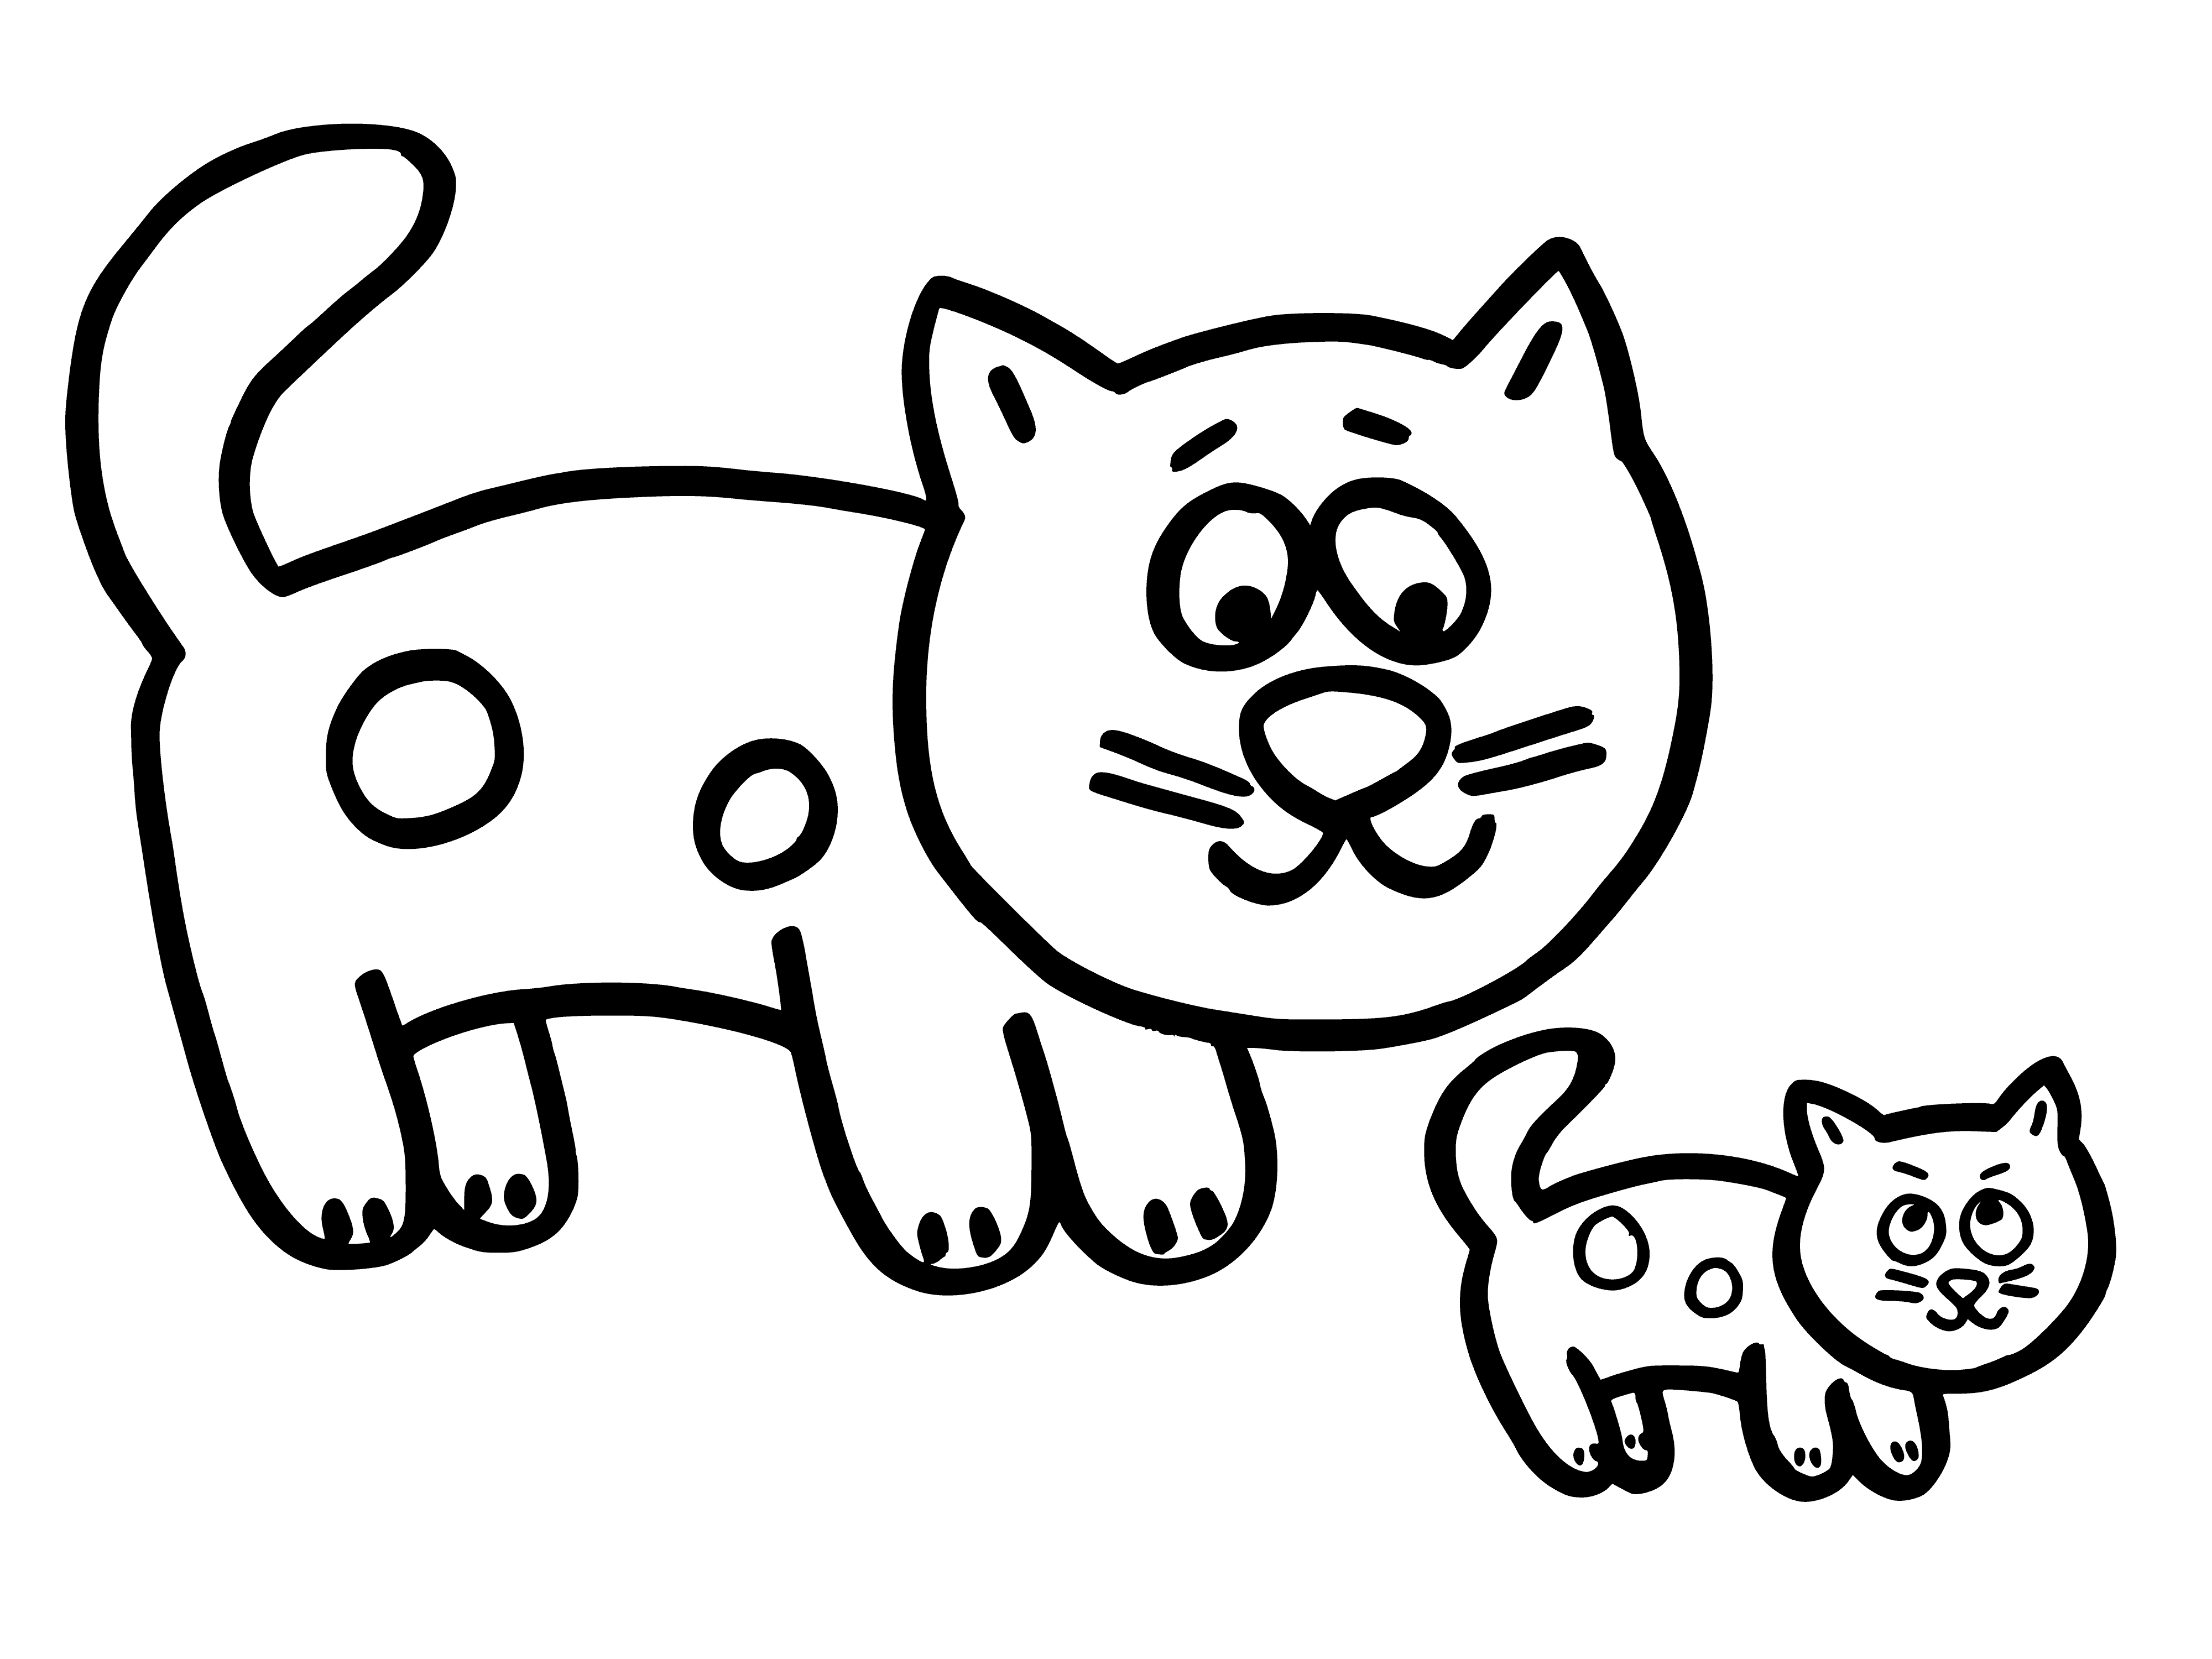 coloring page: Black cat sits on a yellow-green floor w/ a tiny, orange-yellow kitten in its mouth; both have green eyes.